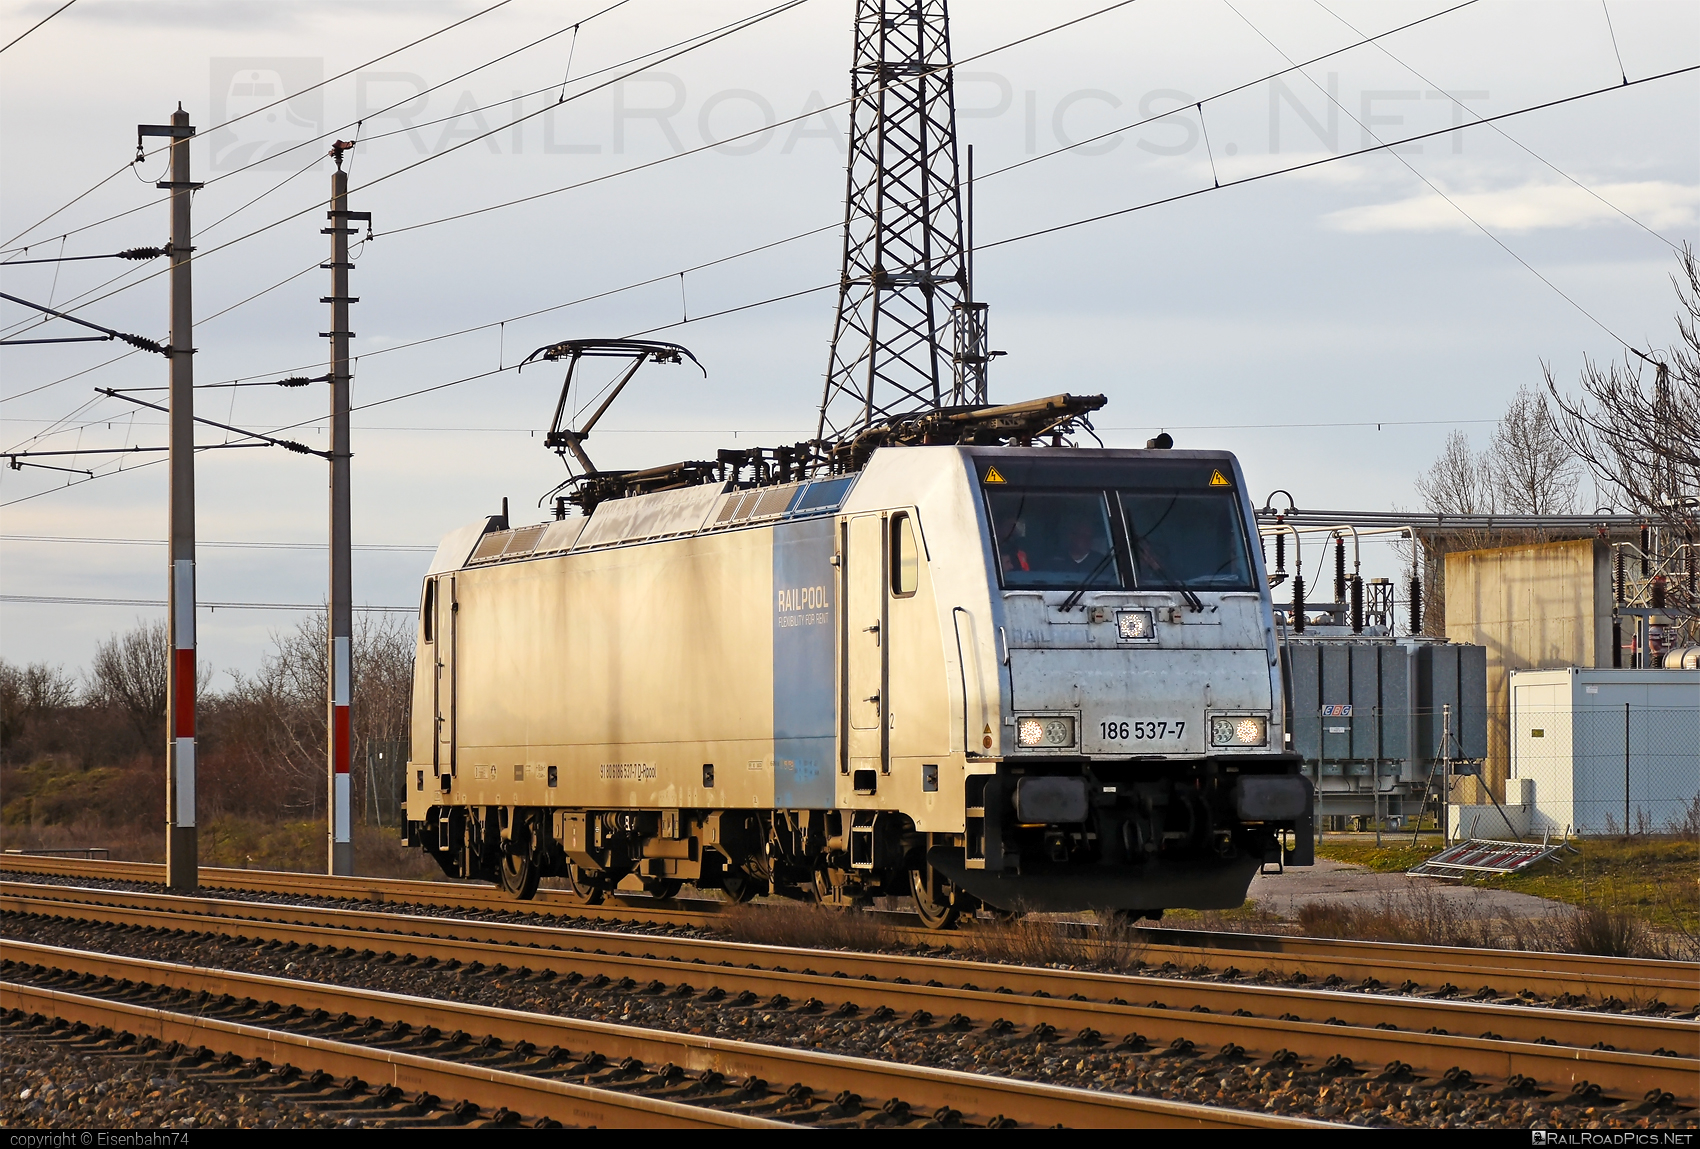 Bombardier TRAXX F140 MS - 186 537-7 operated by METRANS Rail s.r.o. #bombardier #bombardiertraxx #hhla #metrans #metransrail #railpool #railpoolgmbh #traxx #traxxf140 #traxxf140ms